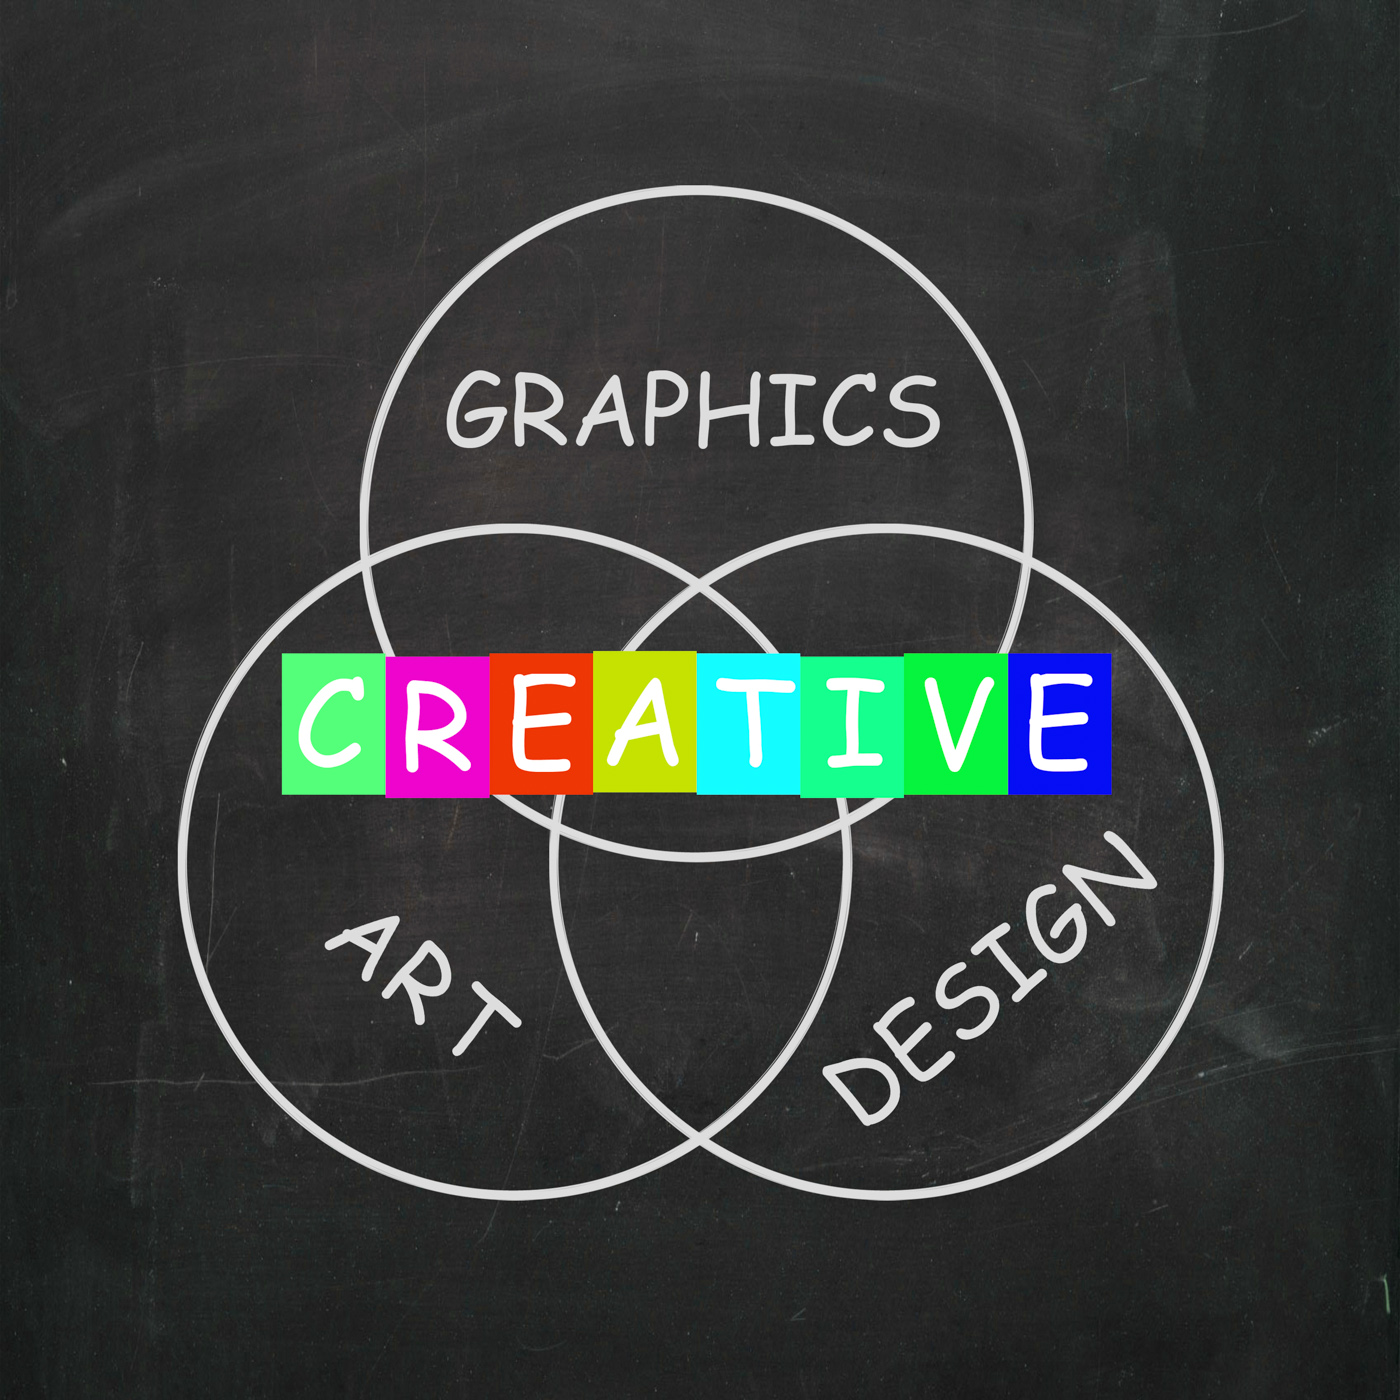 Creative choices refer to graphics art design and creativity photo